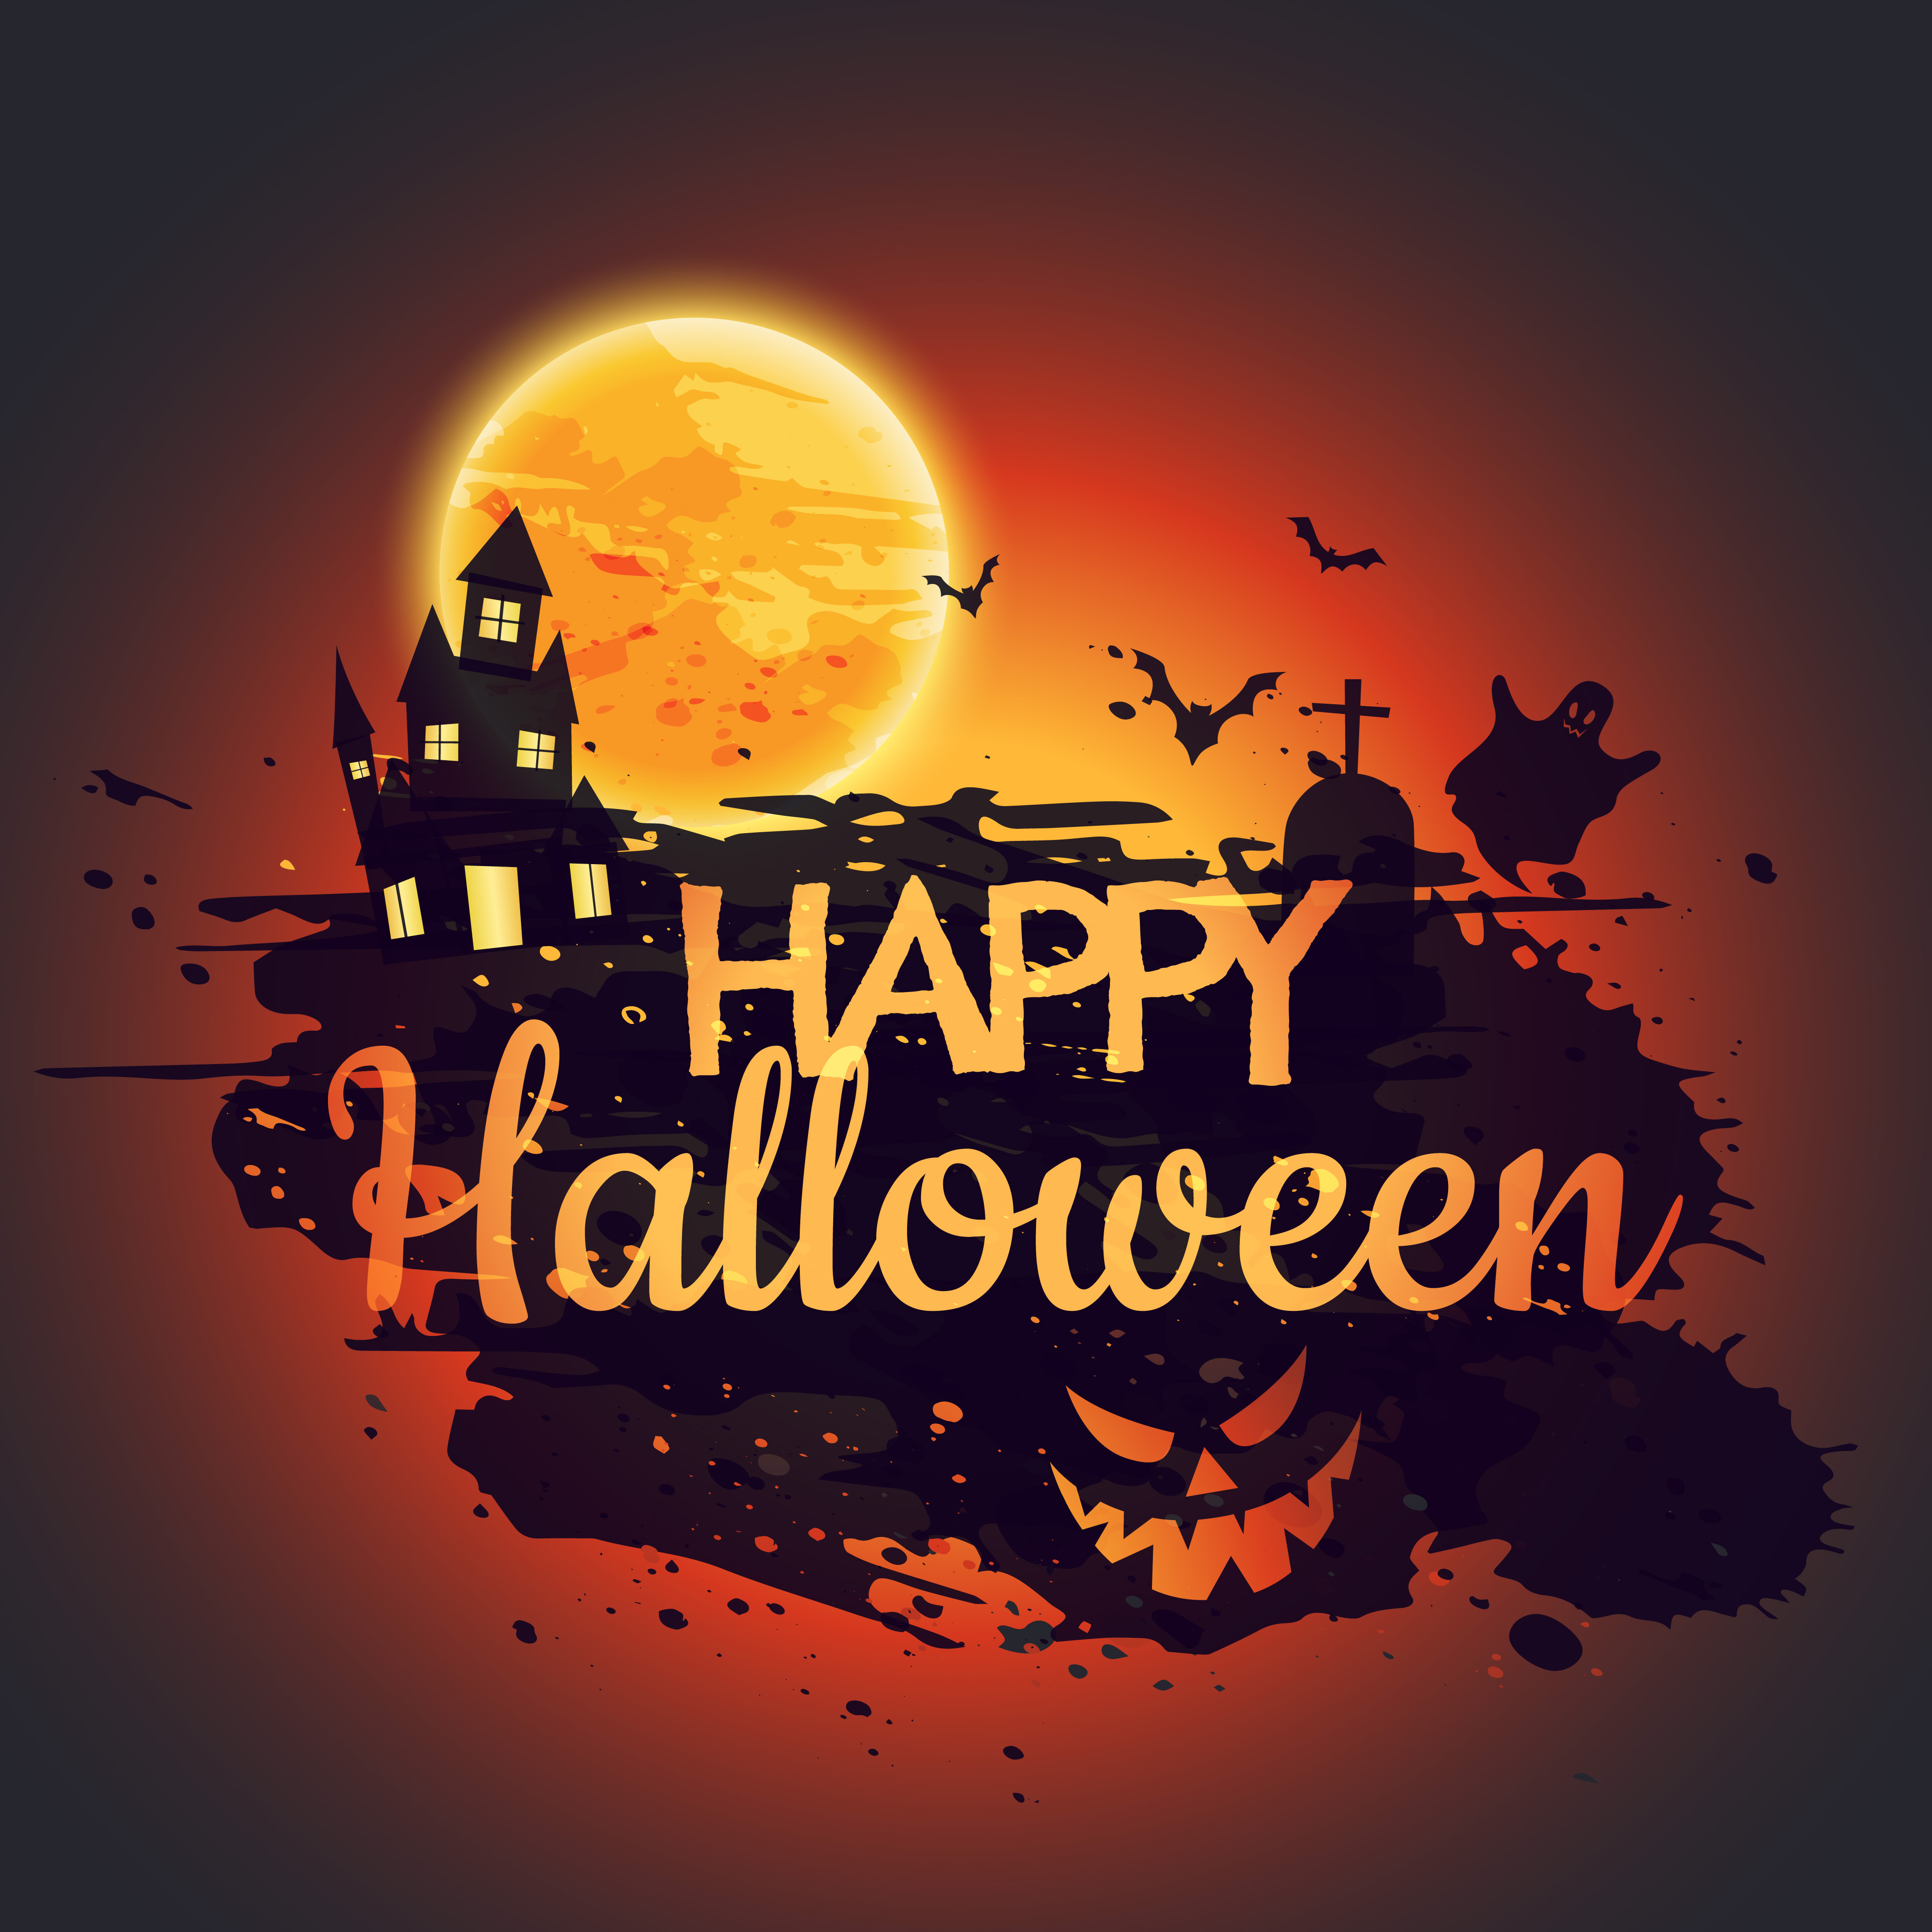 happy halloween poster with creepy castle - Download Free Vector Art, Stock Graphics & Images